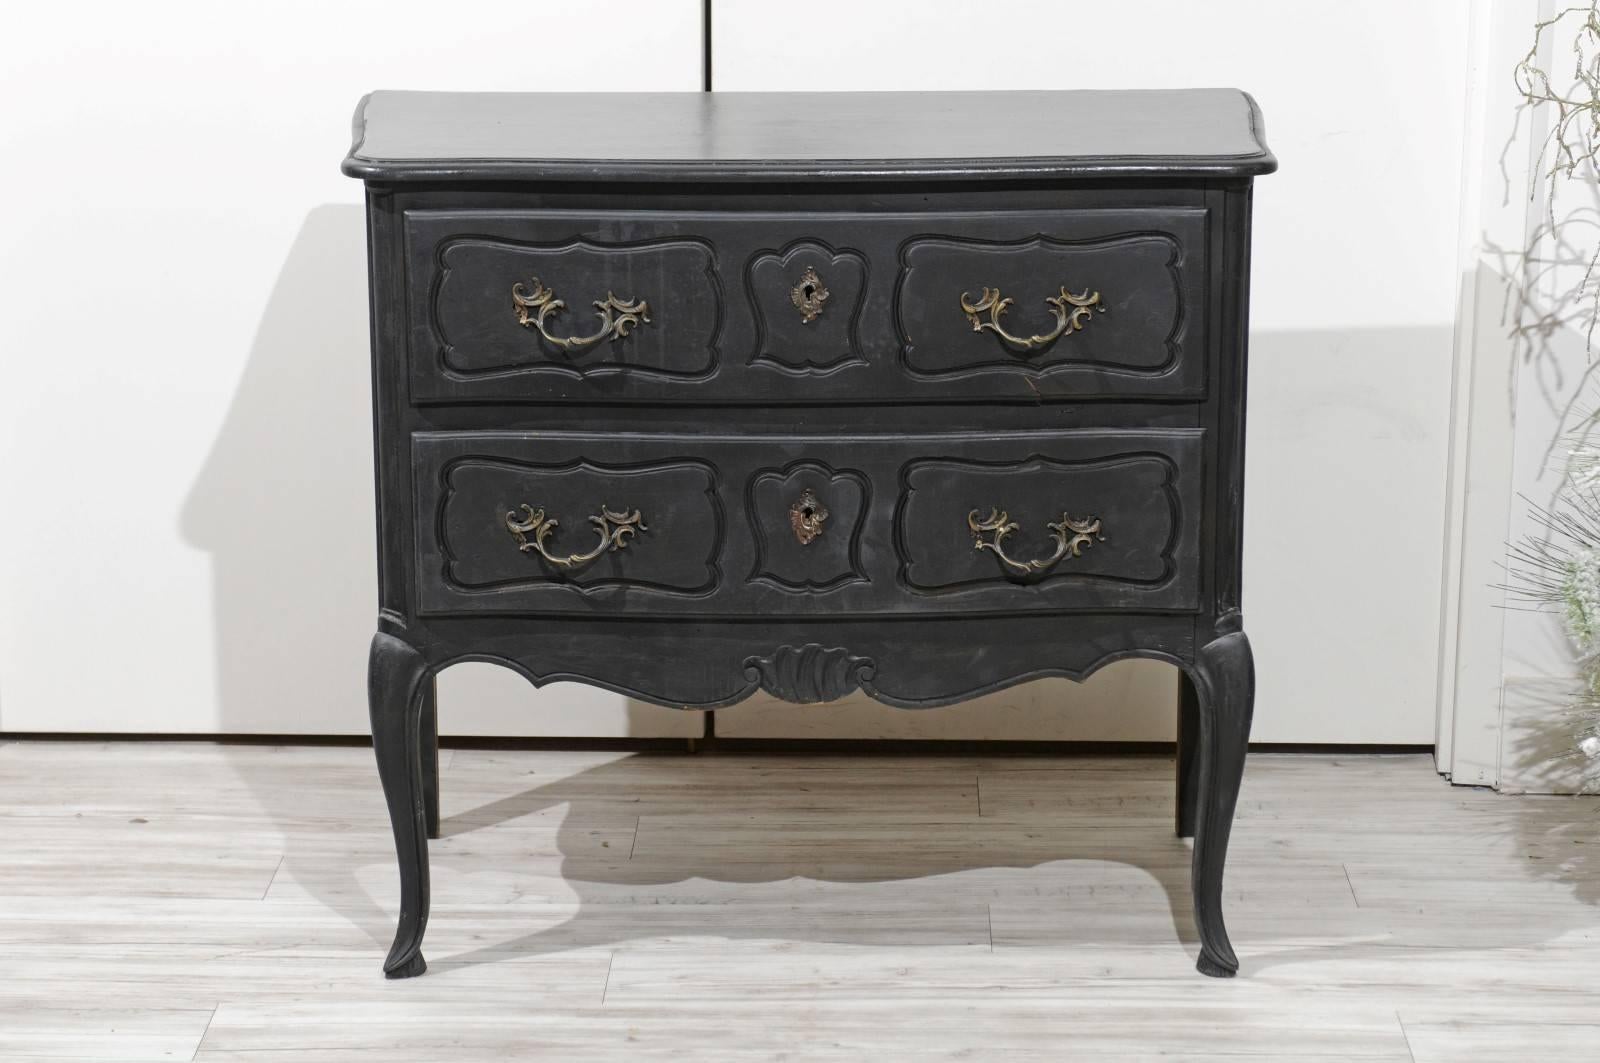 A Northern French black painted Louis XV style two-drawer commode from the early 20th century with Rococo style hardware, scalloped apron and cabriole legs. We are always on the lookout for a smaller commode that will work beautifully as a bedside